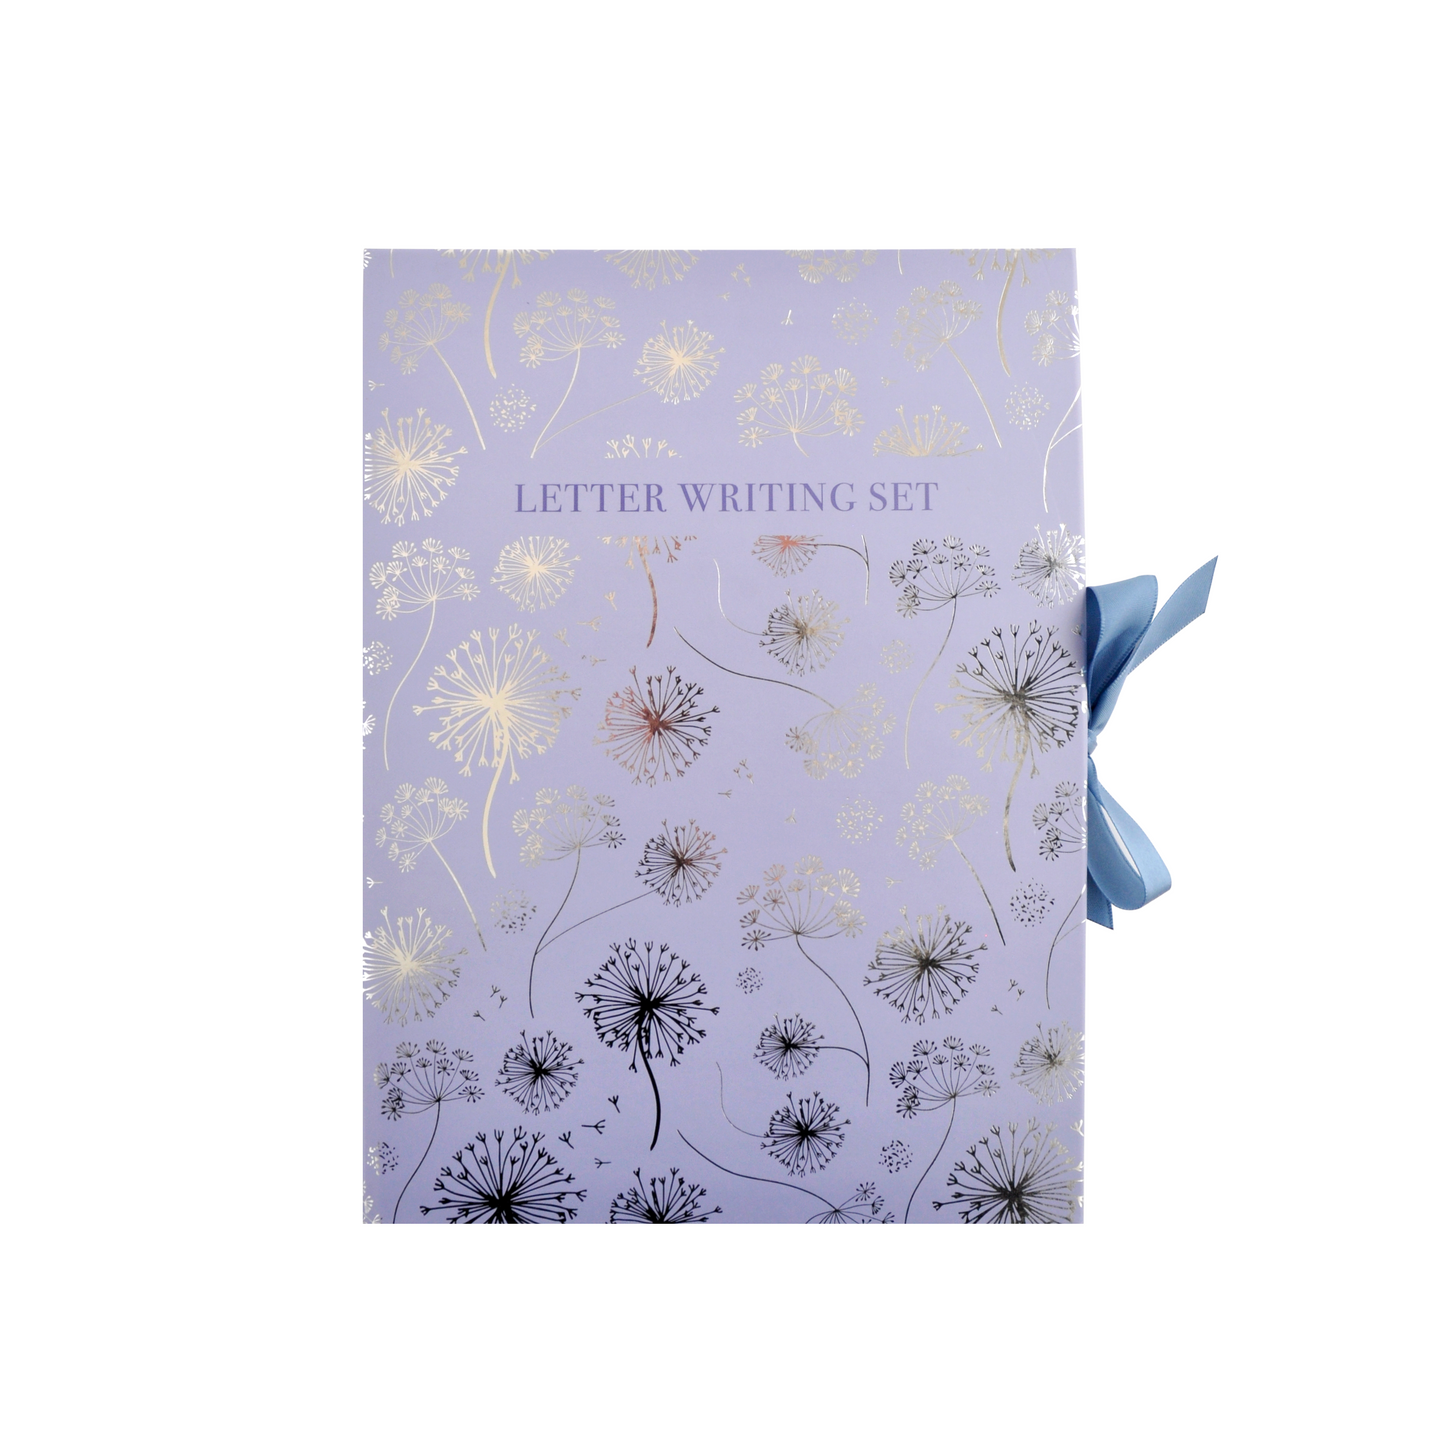 Letter Writing Set - DAINTY